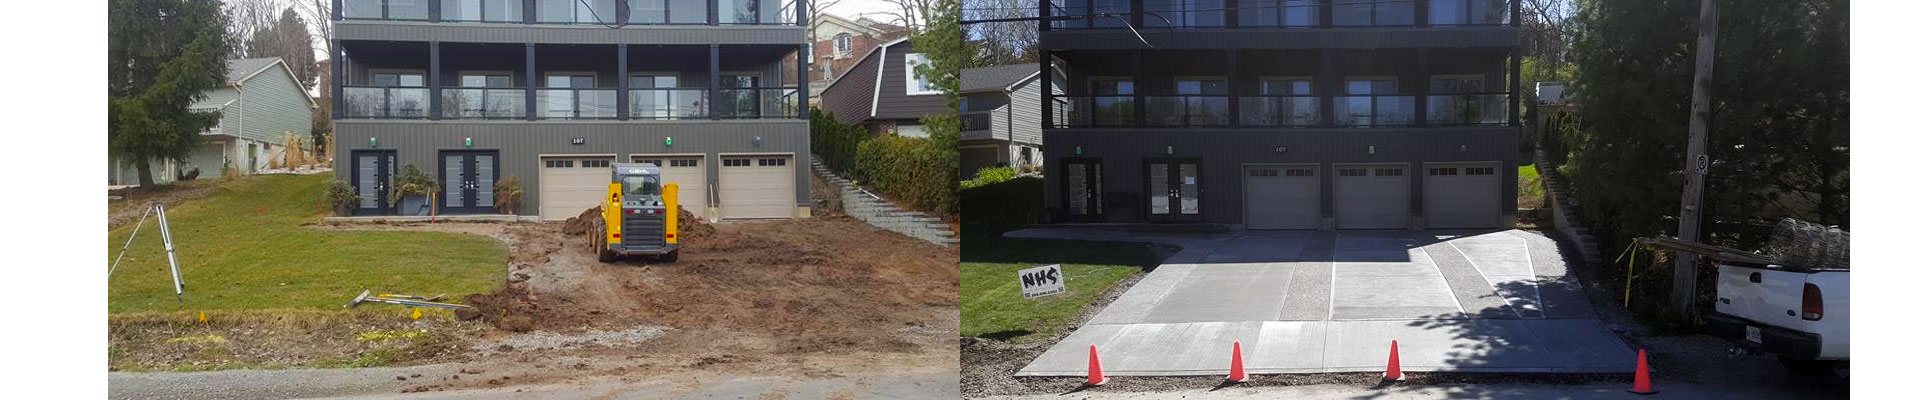 Niagara Hardscaping Services. We do it right